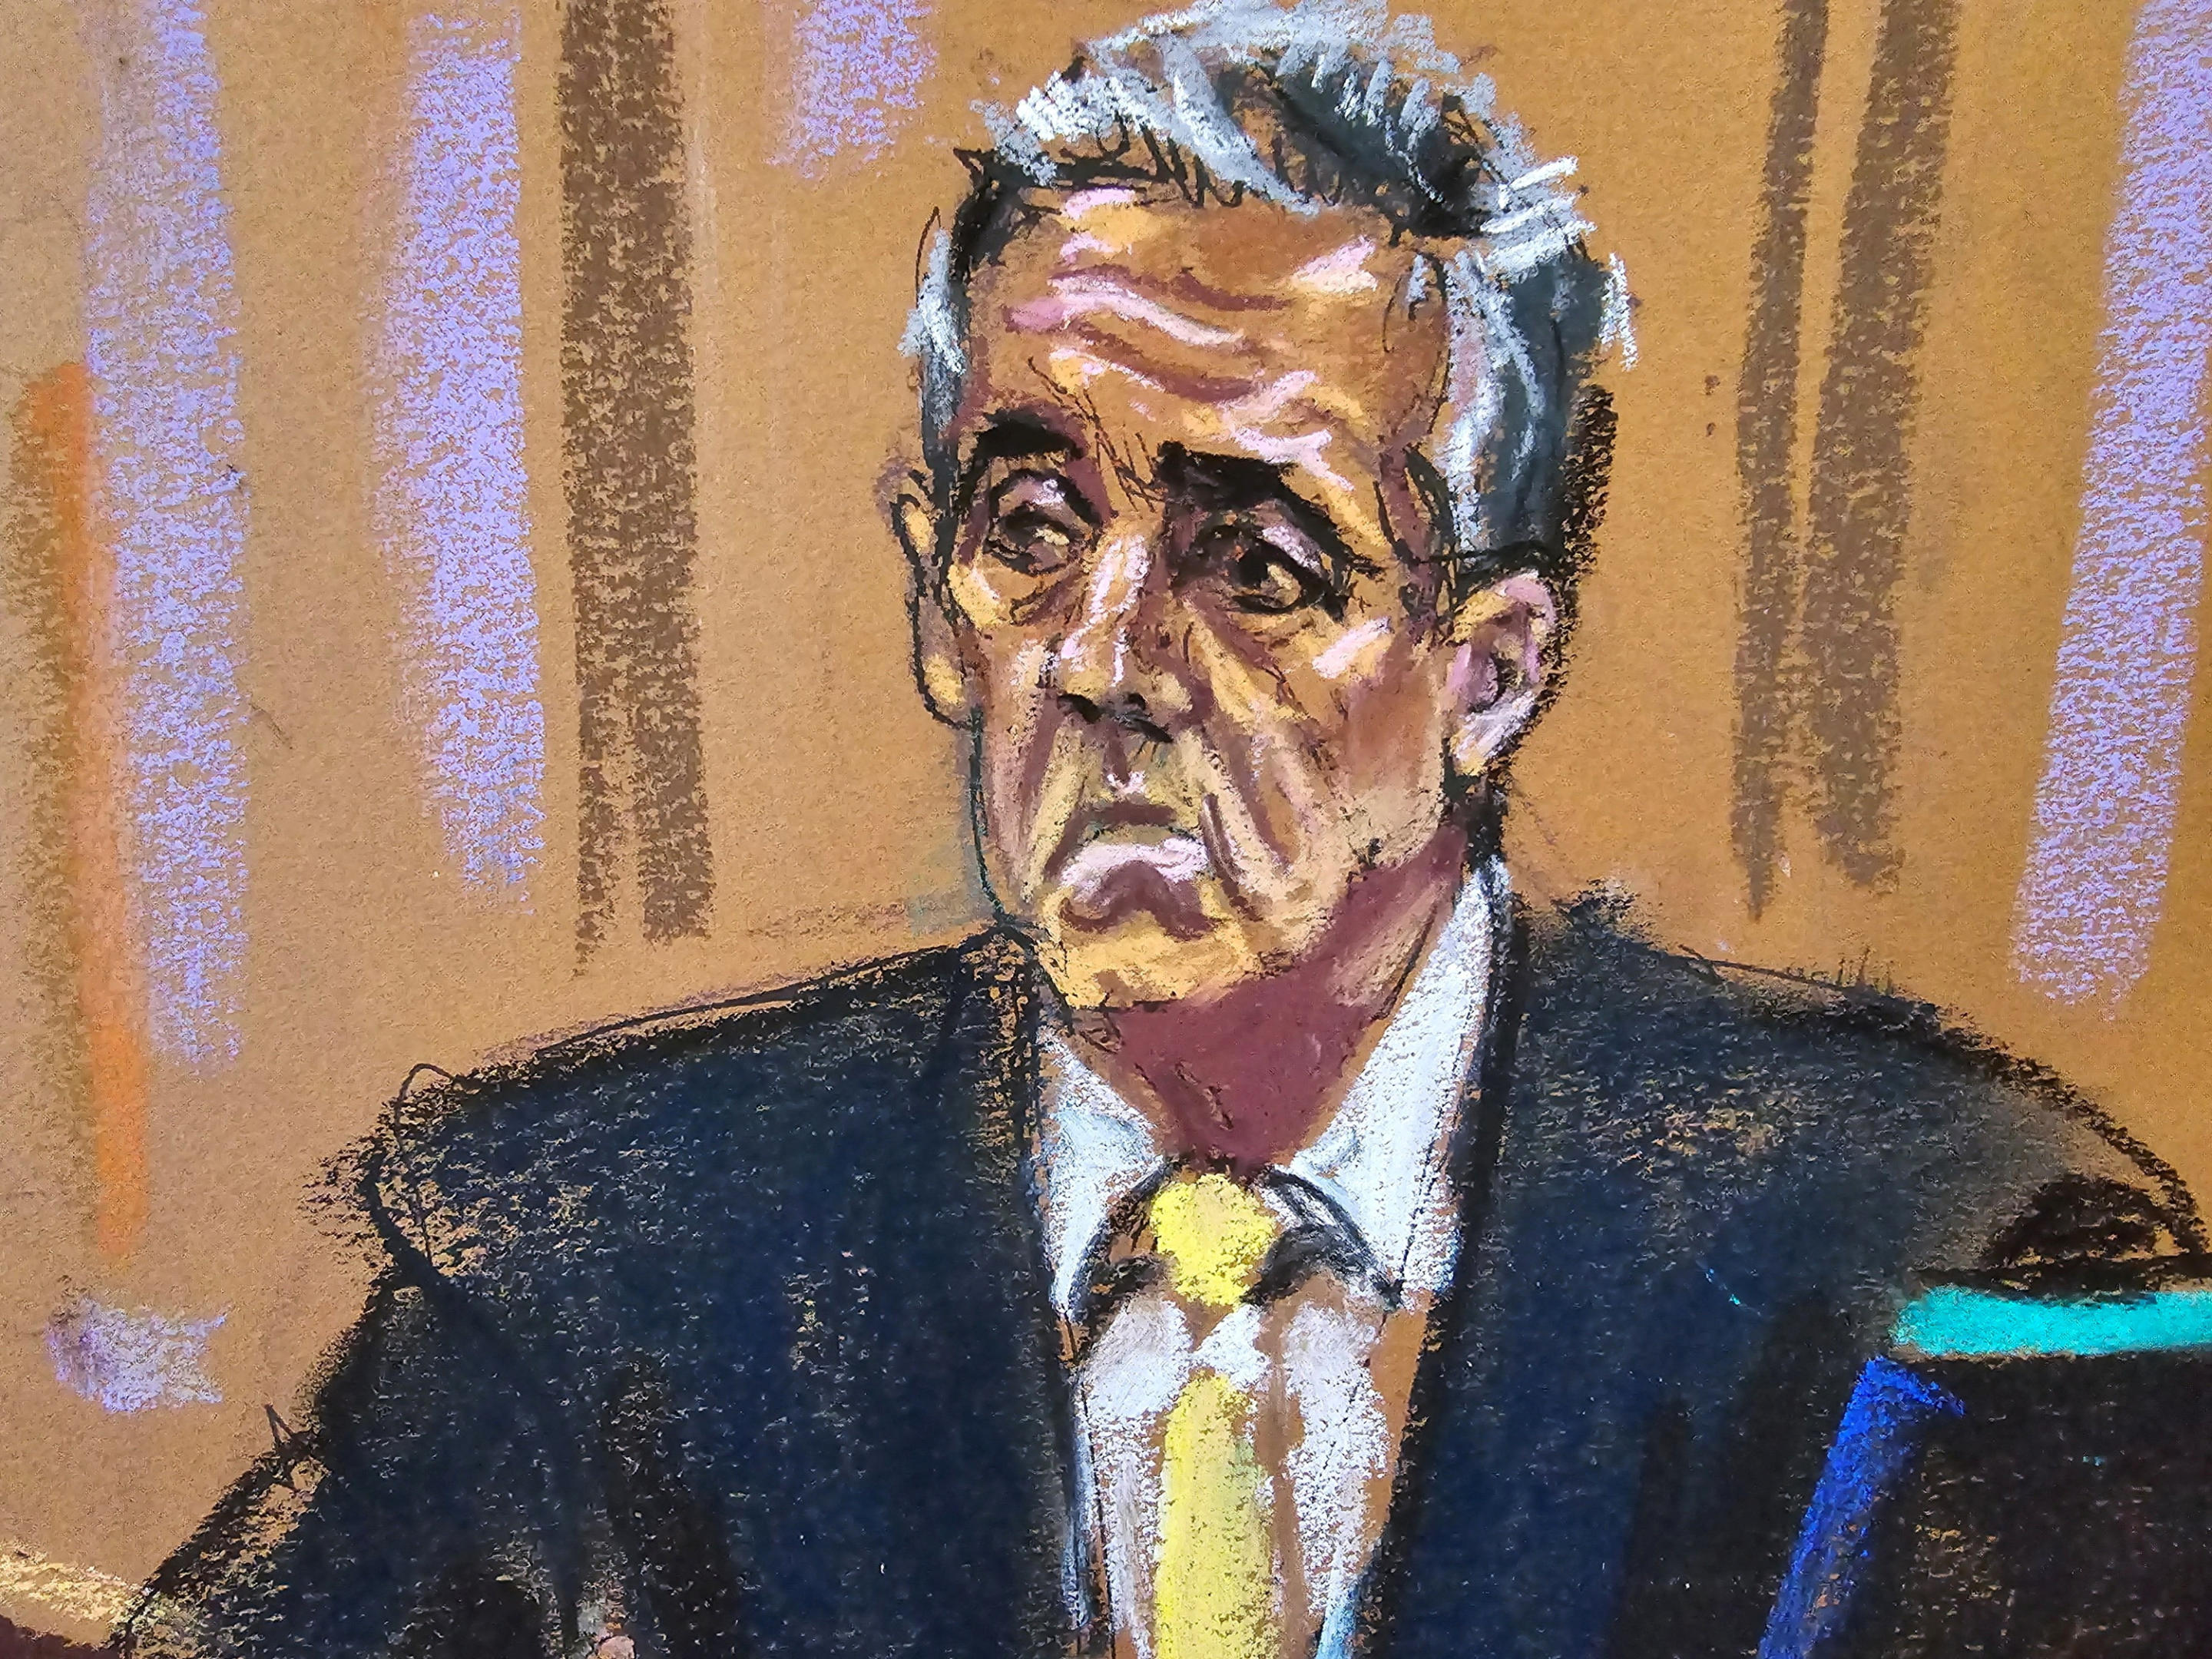 Michael Cohen, Trump's former lawyer and so-called fixer, is cross-examined by the defense on May 16.